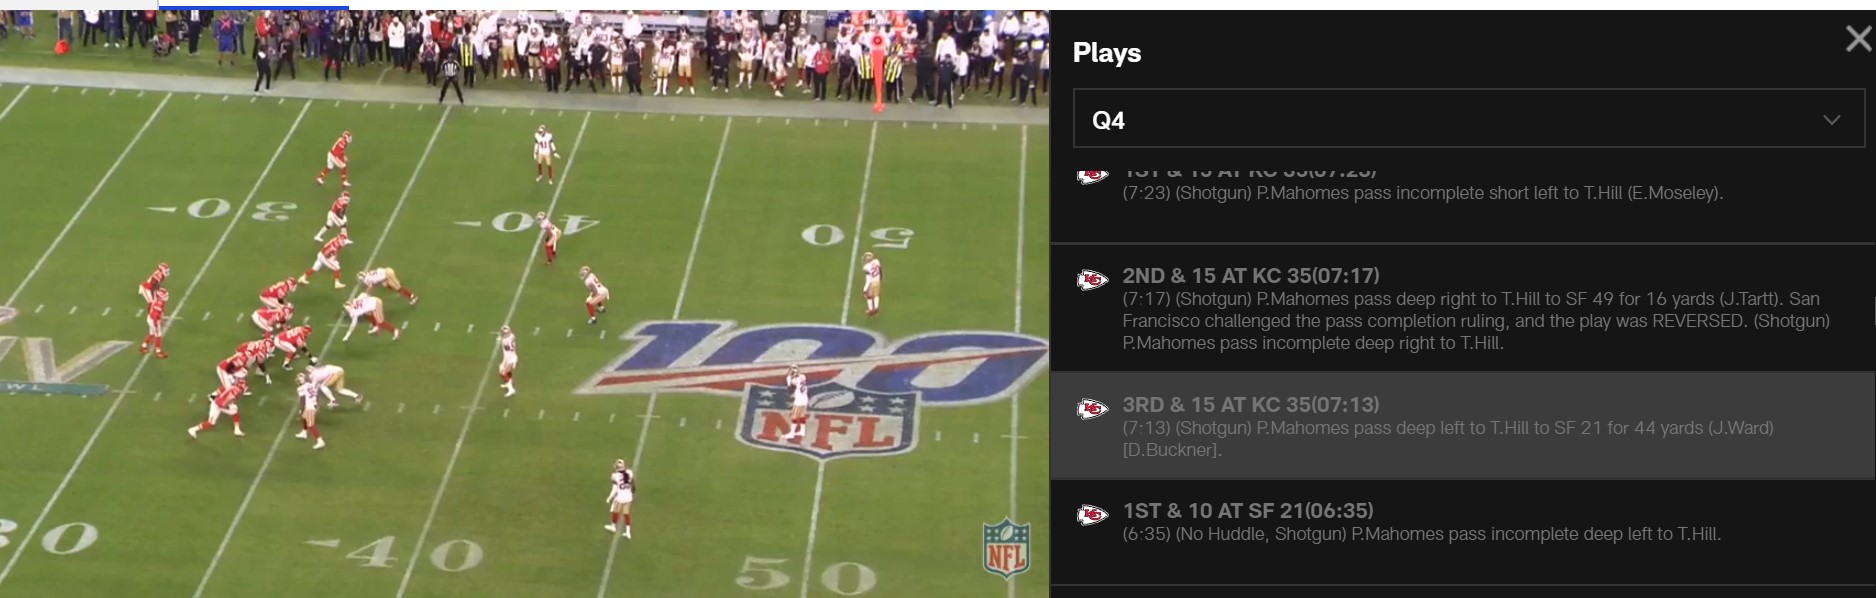 nfl game pass doesn t work